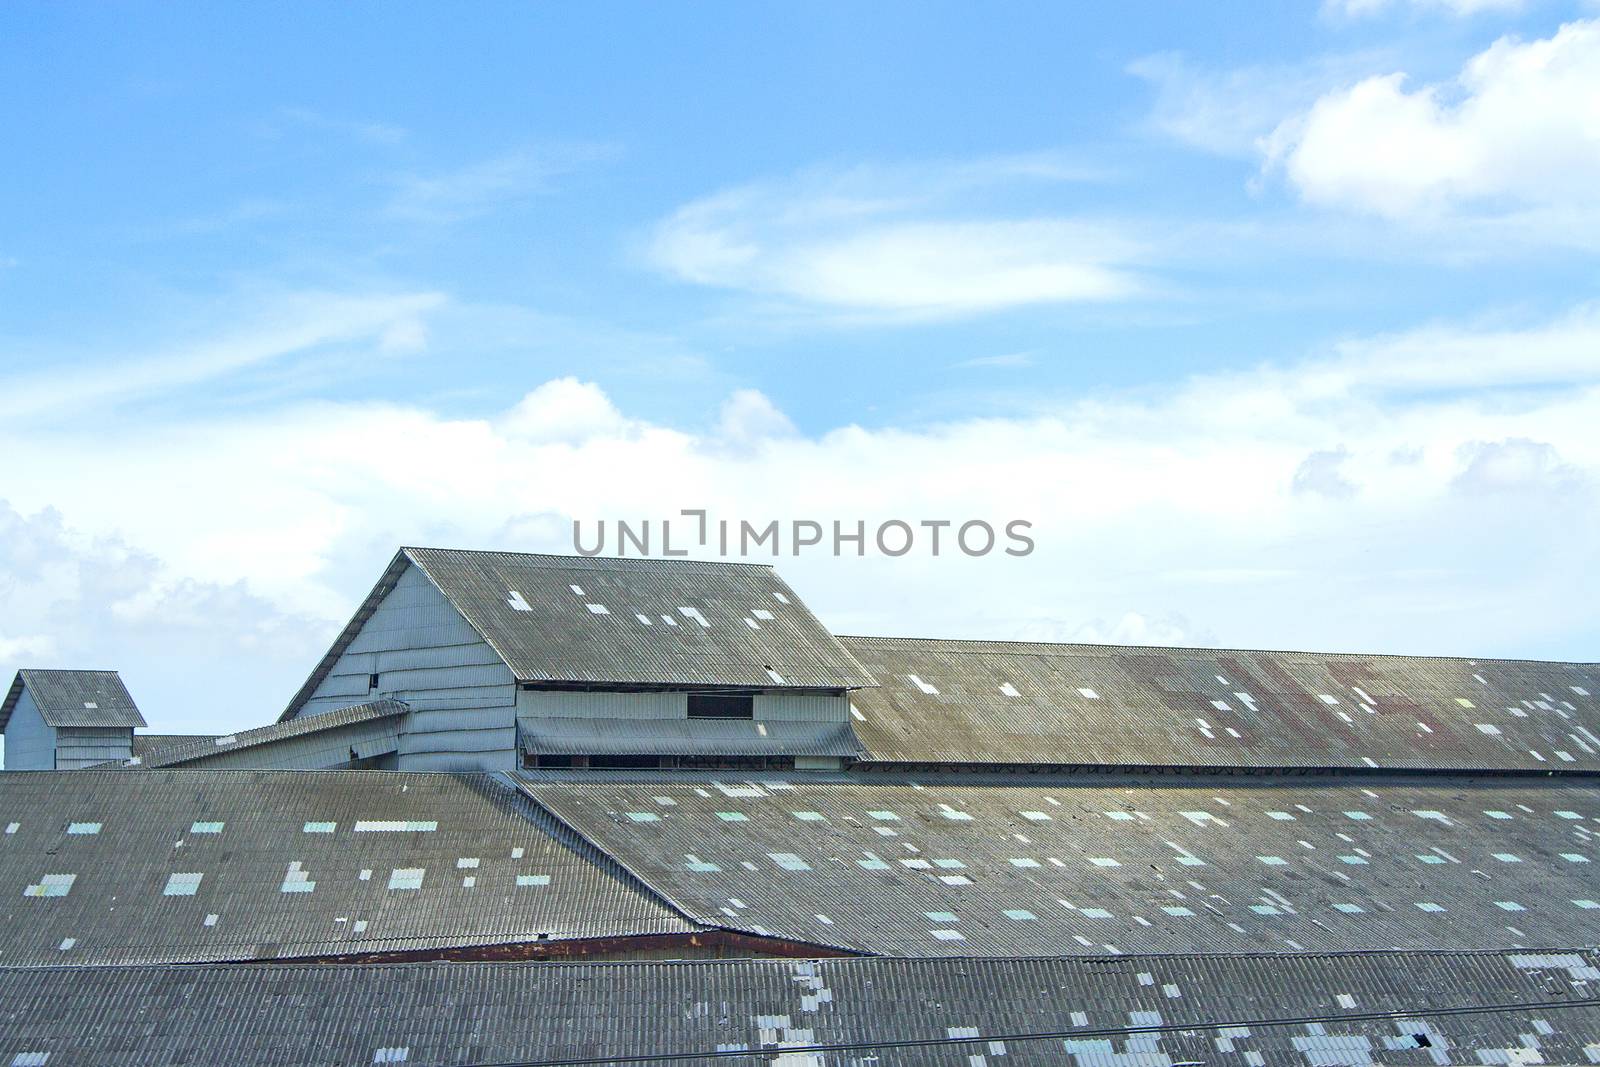 The roof of an old warehouse in the blue sky.